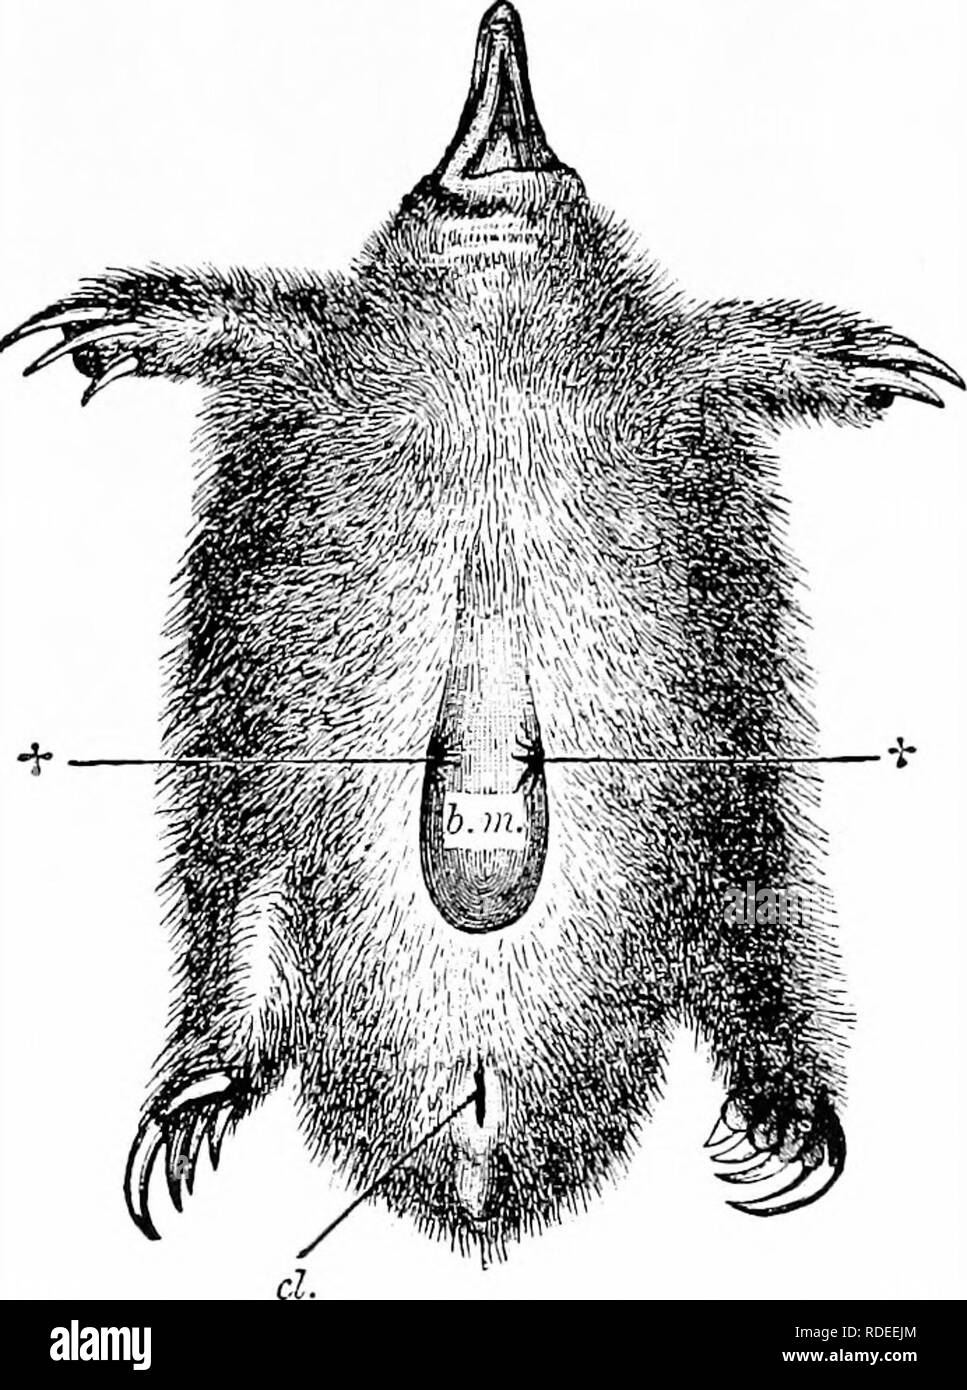 . The mammary apparatus of the mammalia : in the light of ontogenesis and phylogenesis . Mammals; Mammary glands. INCUBATORIUM OF ECHIDNA 5 of the abdomen from that of Echidna, In the case of Echidna, the cutaneous muscle, which covers nearly the whole surface of. Fig. 1.—Echidna: Ventral View of a Brooding Female, showing the so-called Incubatorium SOMEWHAT ENLARGED. (HaAGKE.) -r-!- The two tufts of hair in the lateral folds of the mammary pouch (6.771.), from which the secretion flows ; cl., cloaca. the trunk, leaves free an oval area of the abdominal wall, situated between the two mammary g Stock Photo